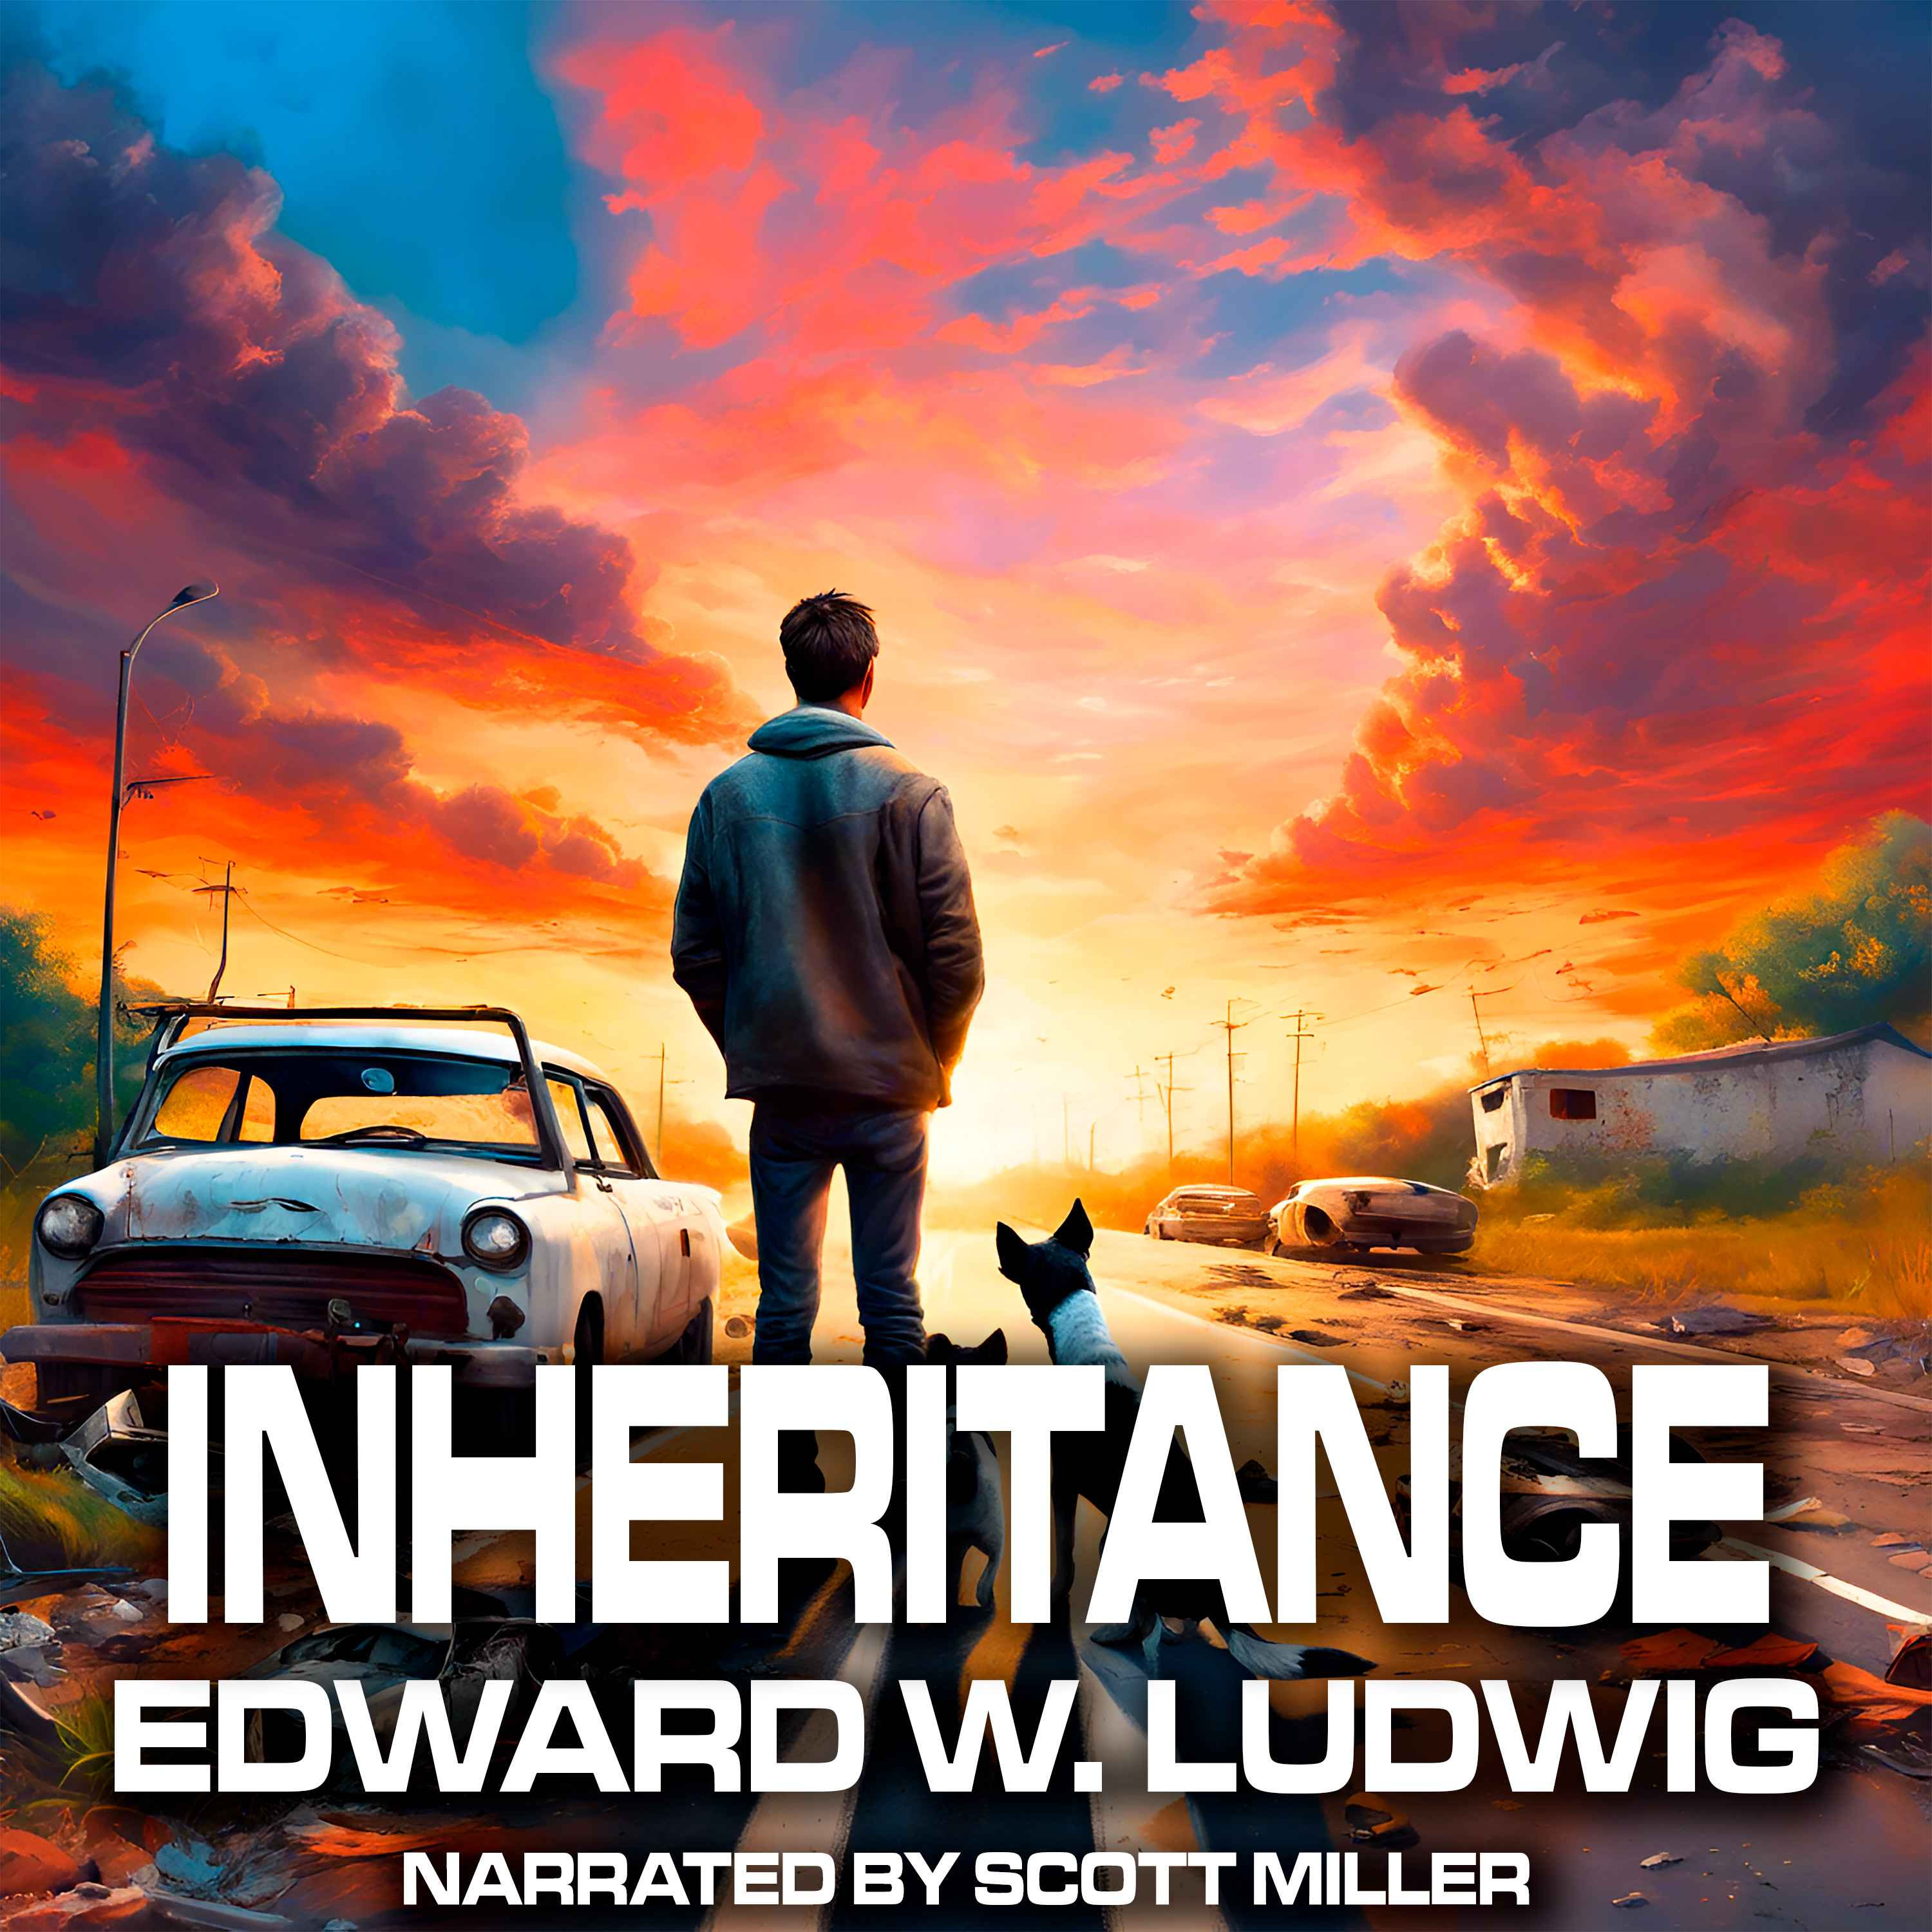 Inheritance by Edward W. Ludwig - Short Sci Fi Story From the 1950s